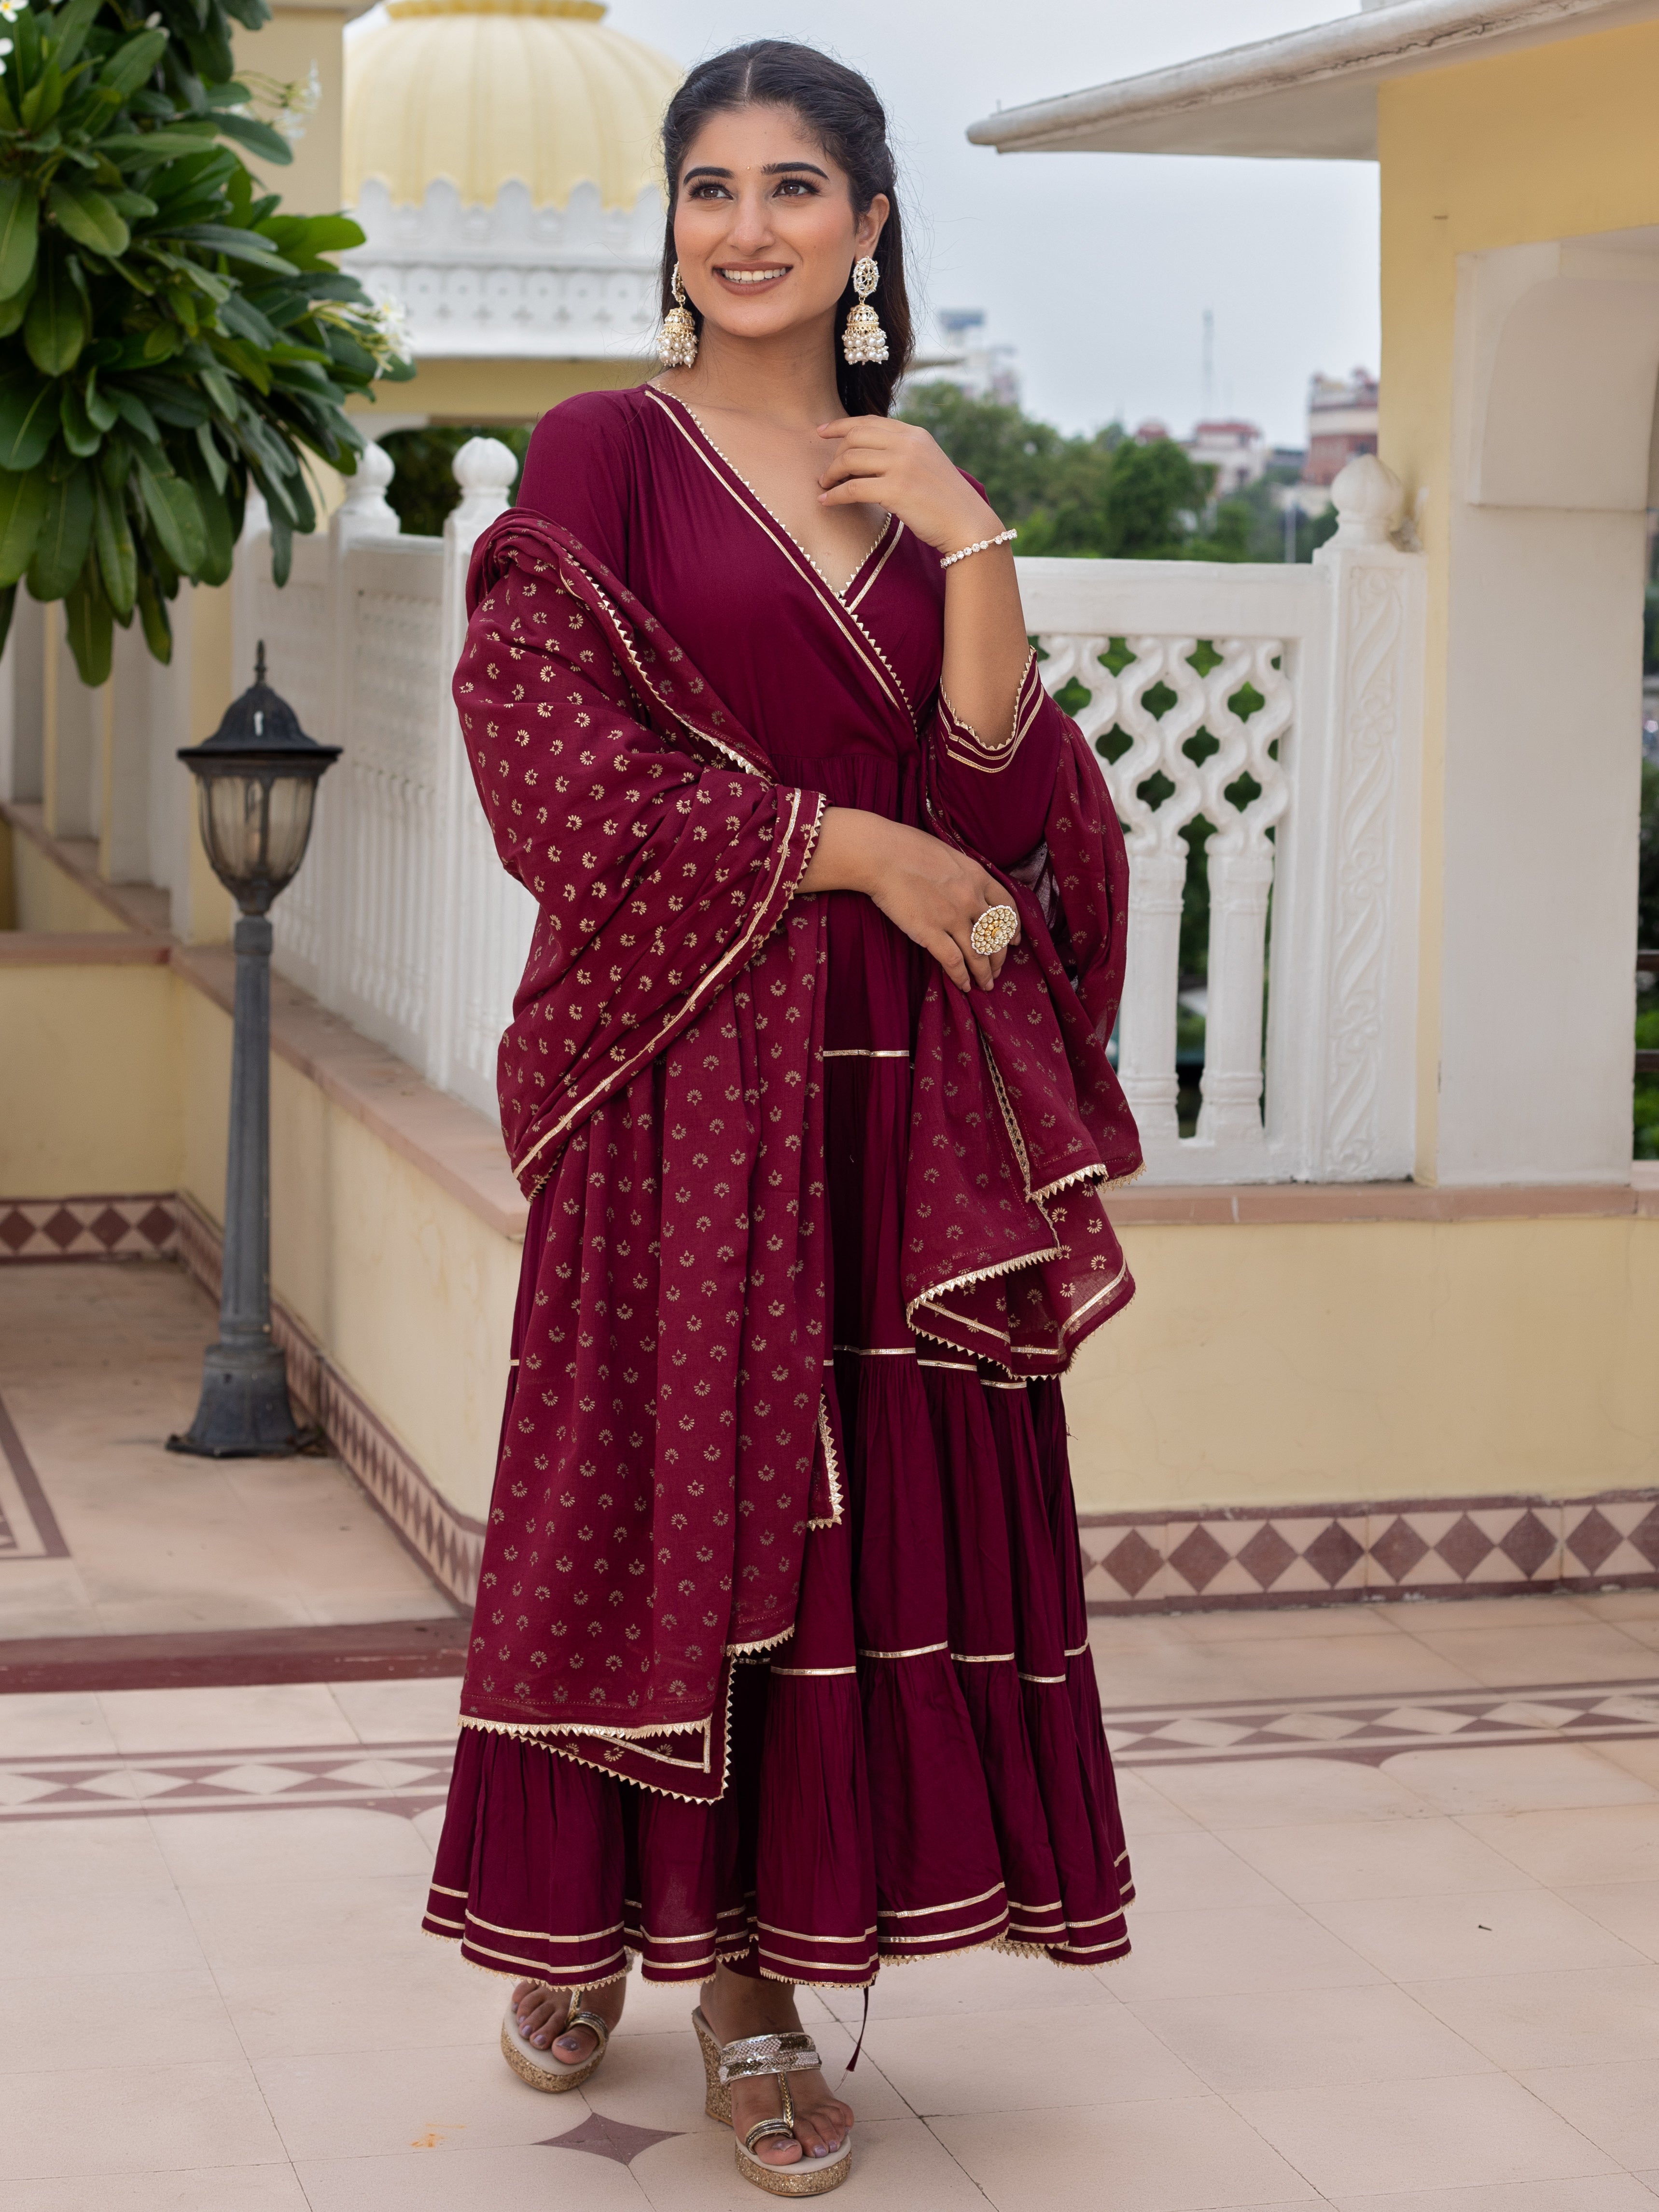 this-burgundy-tiered-kurta-has-been-expertly-crafted-with-a-stylish-tiered-design-featuring-a-kurta-pants-and-a-dupatta-this-three-piece-outfit-will-add-a-touch-of-elegance-to-any-wardrobe